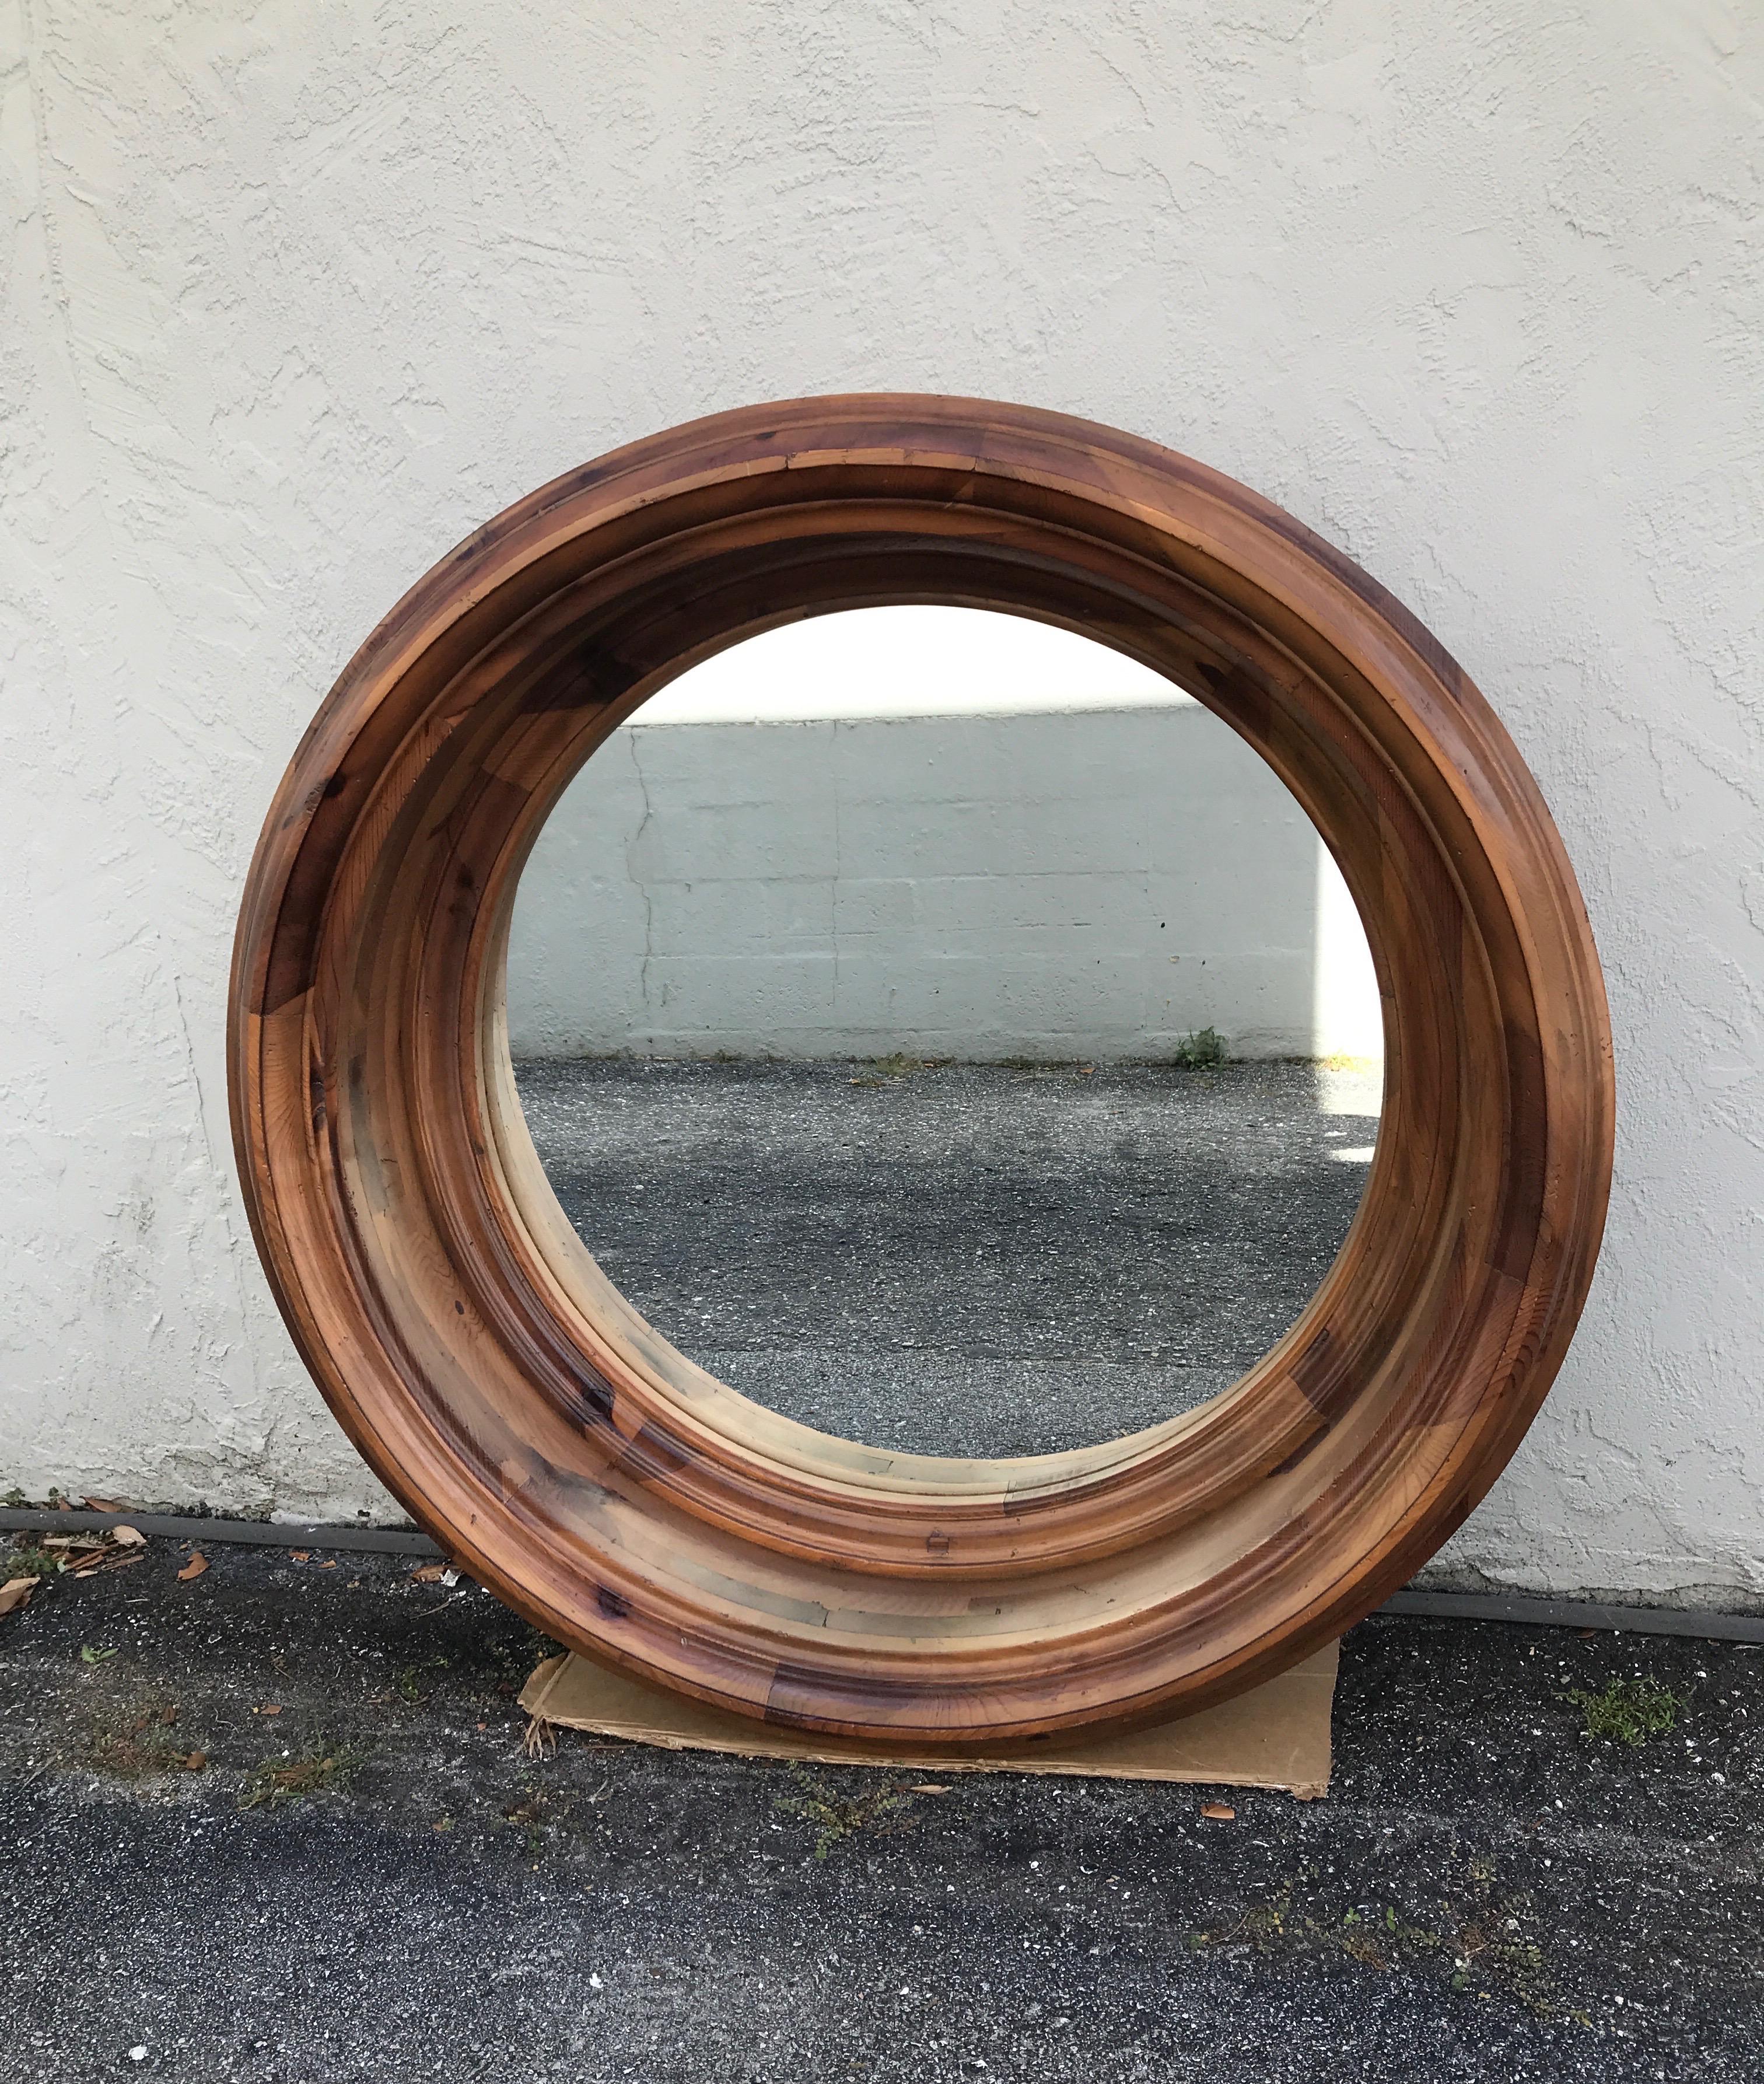 Iconic monumental Porthole wood mirror by Ralph Lauren.